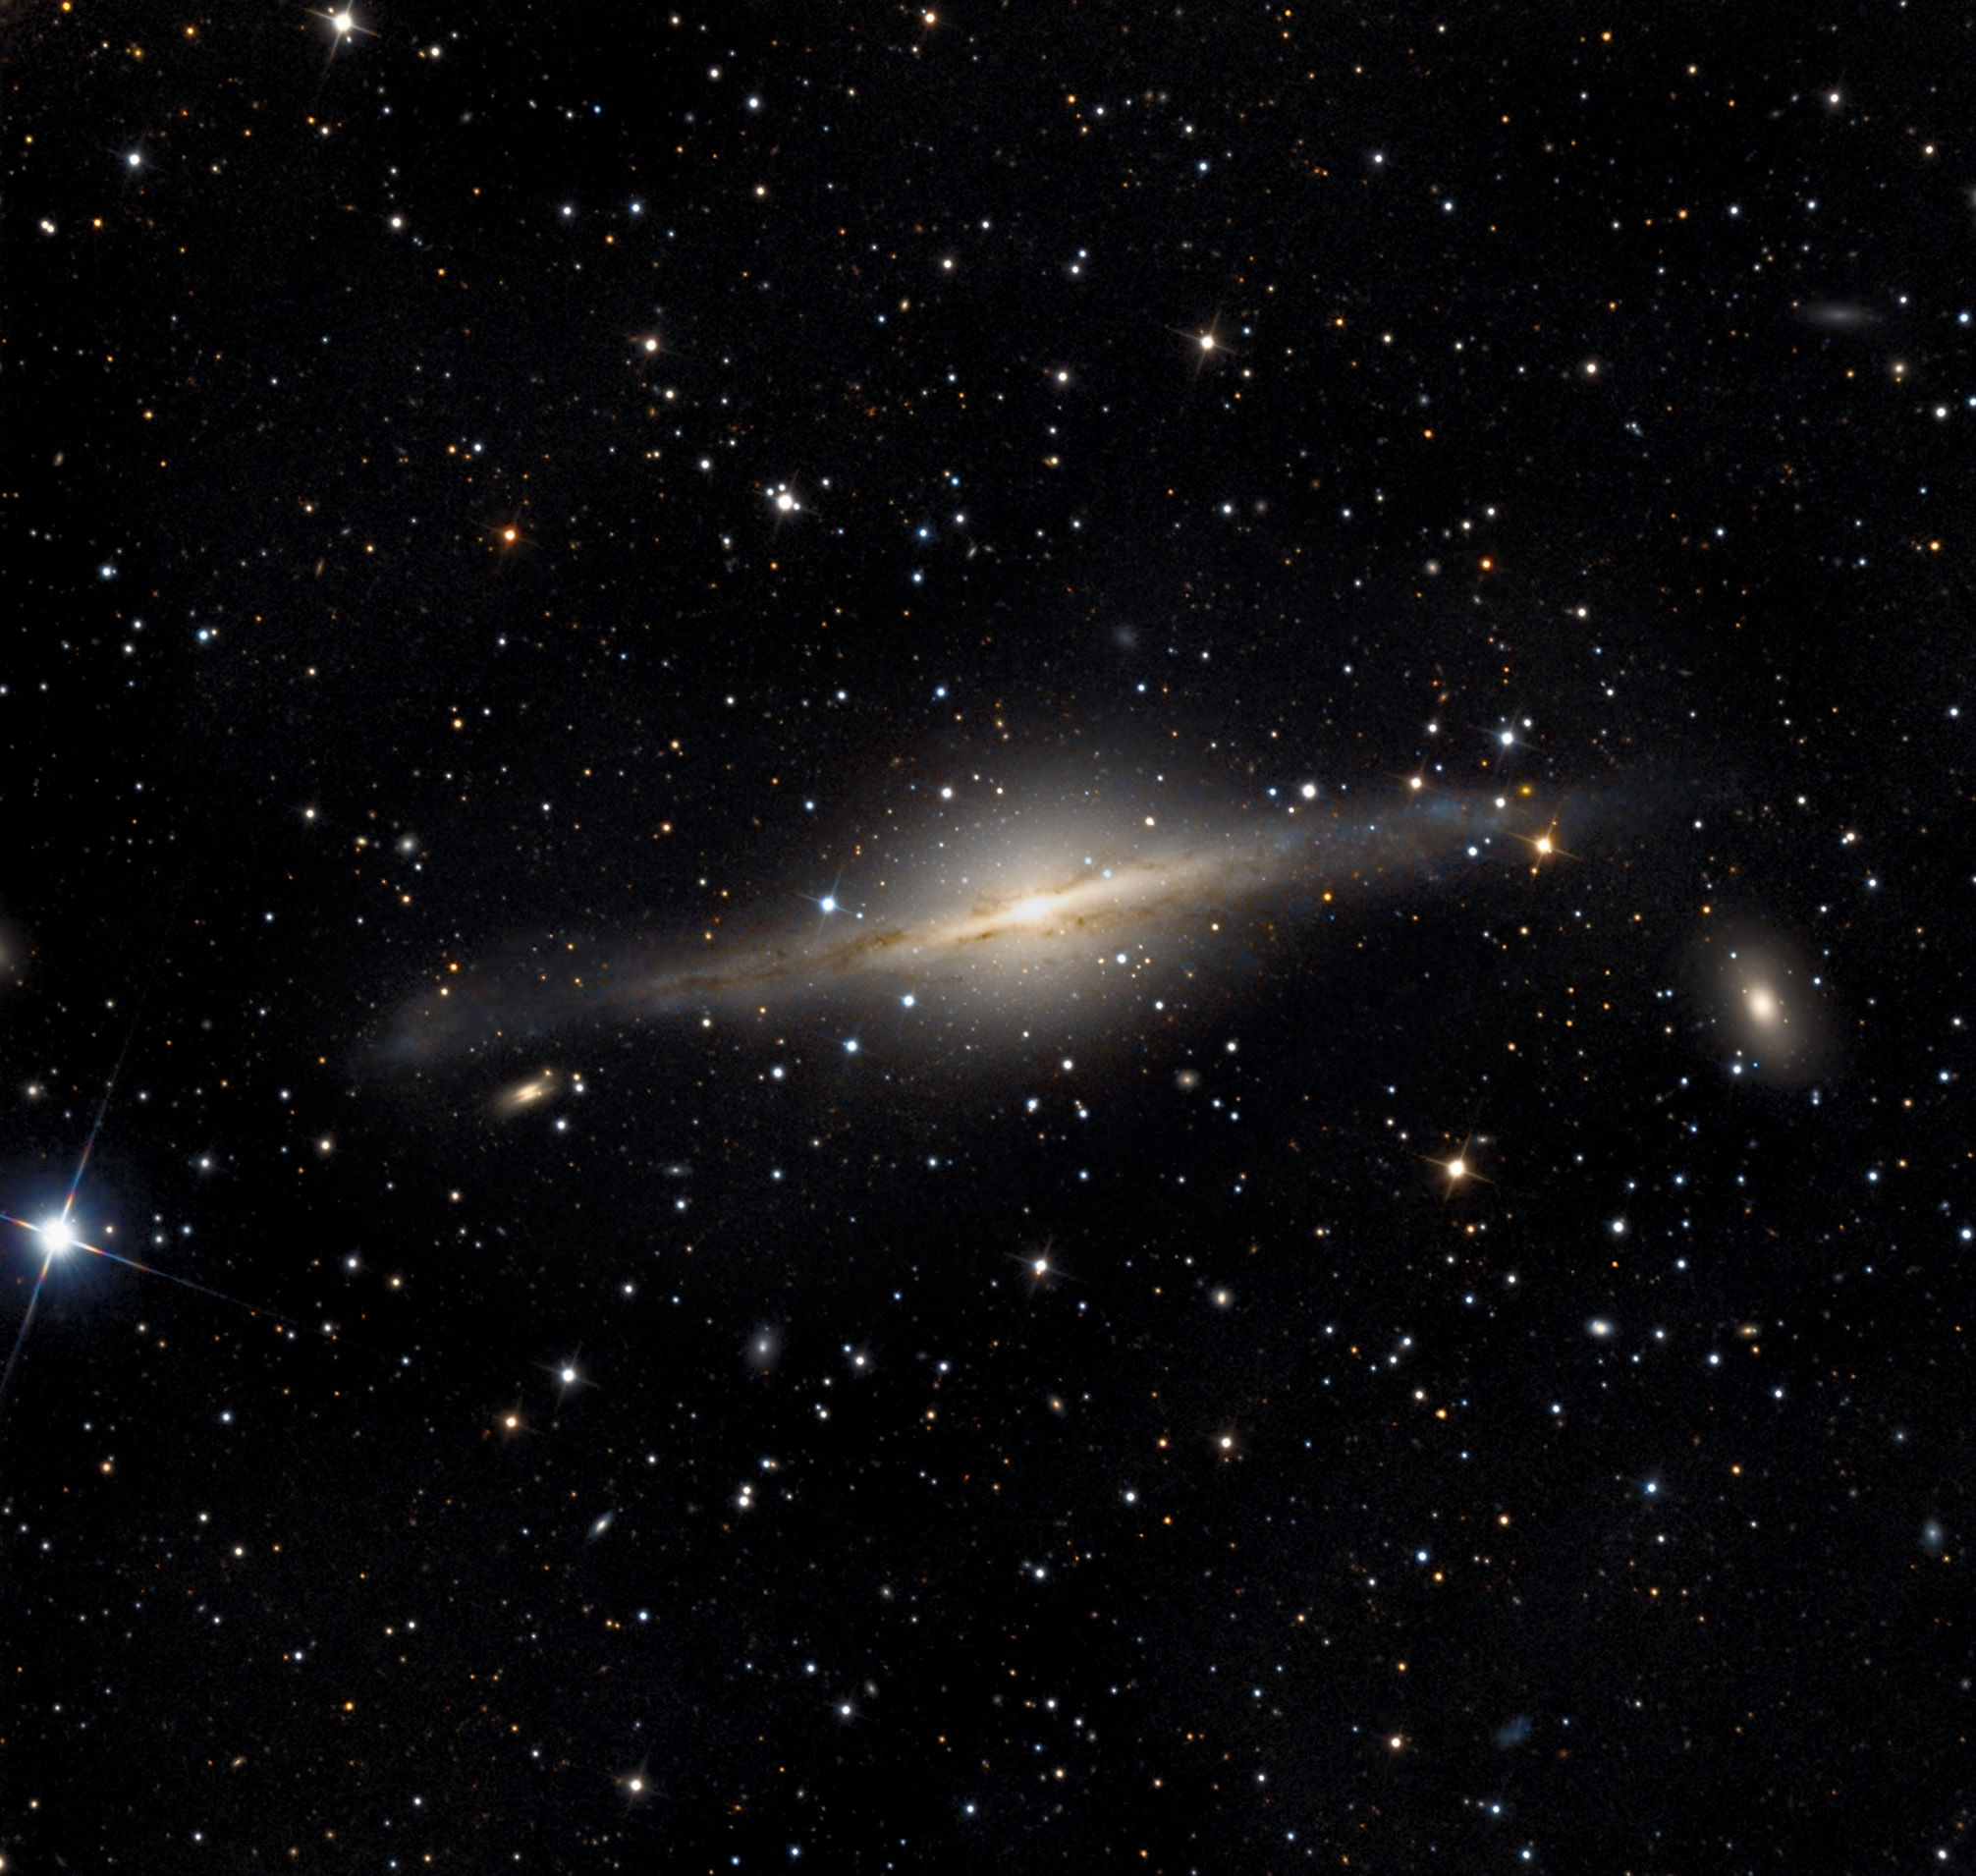 NGC 5084, a lovely but odd disk galaxy with an obviously warped disk. Credit: Adam Block/Mount Lemmon SkyCenter/University of Arizona